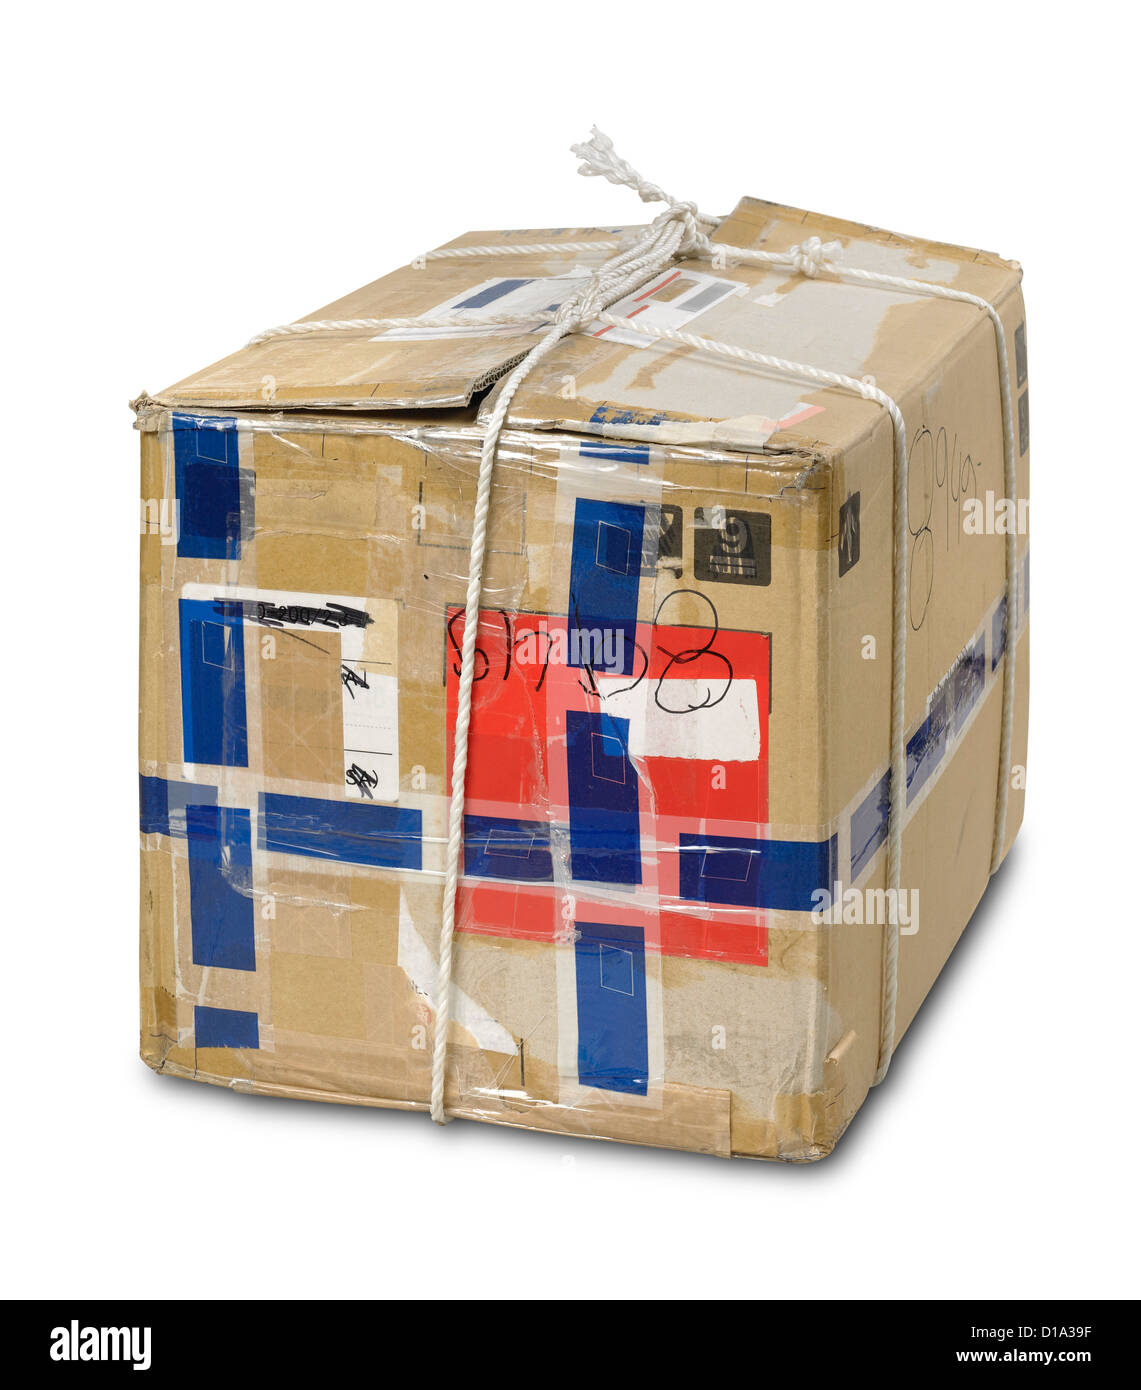 Old box containing products. The box is not in good condition. The parcel has been isolated on white. Stock Photo